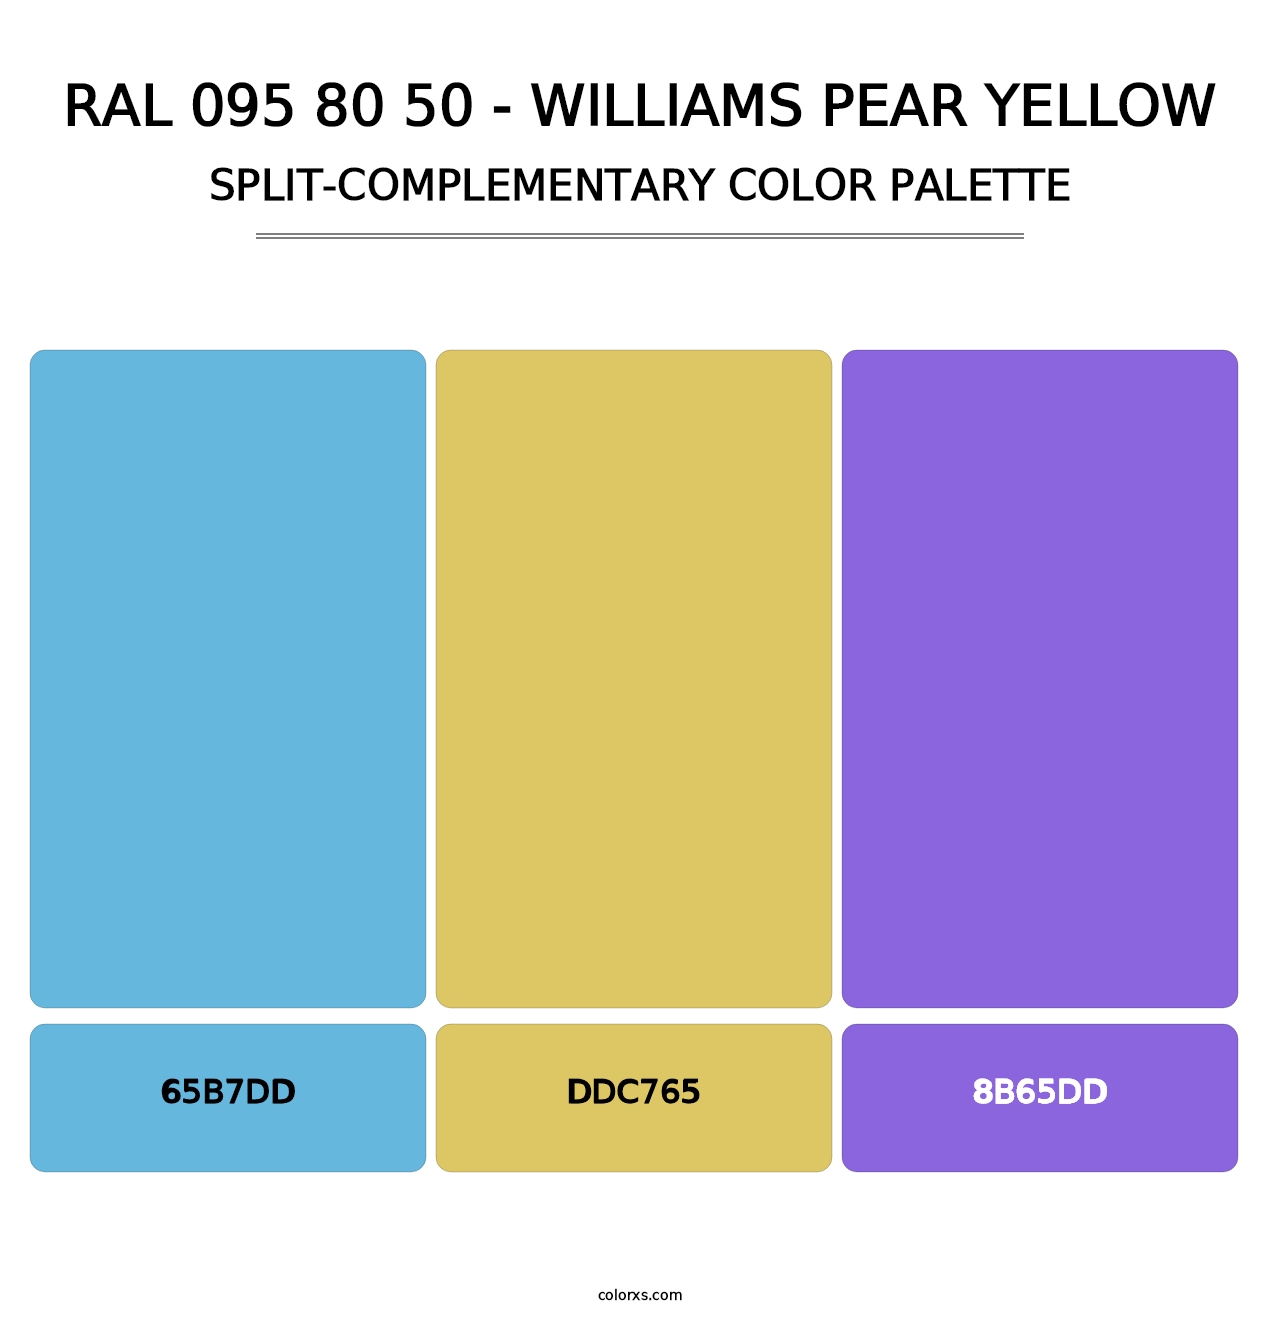 RAL 095 80 50 - Williams Pear Yellow - Split-Complementary Color Palette